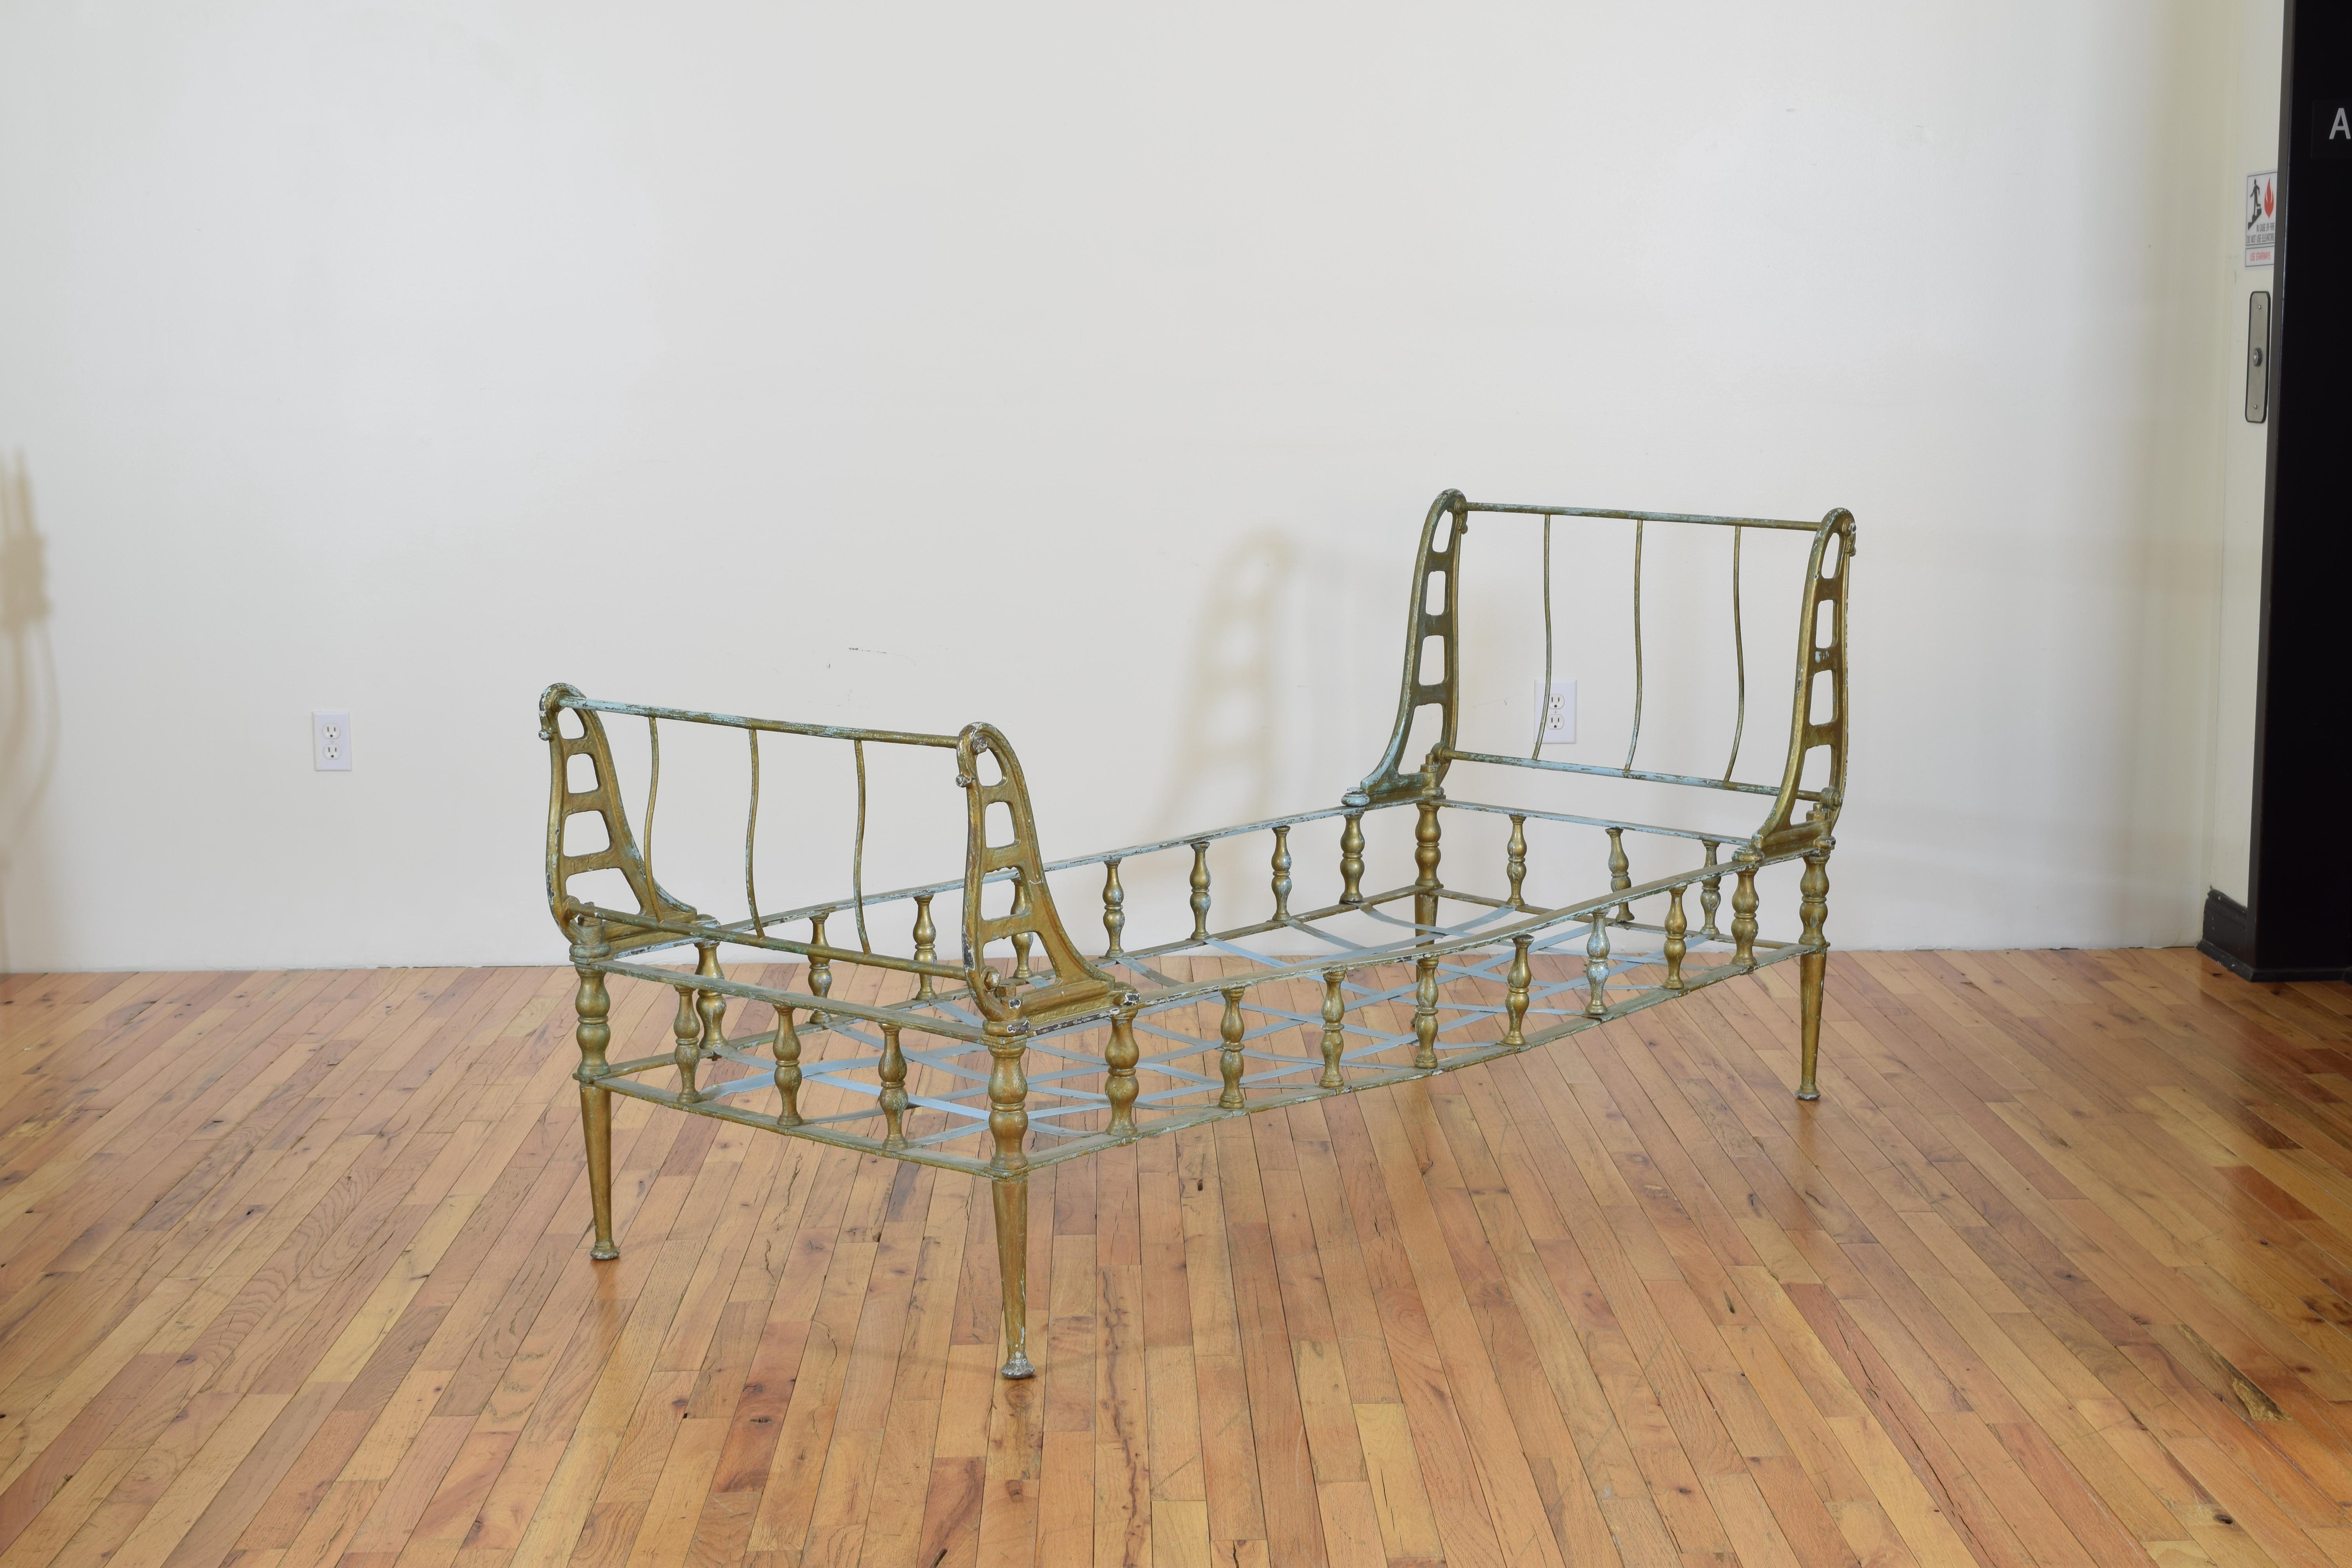 Entirely constructed of cast iron, the frame of 